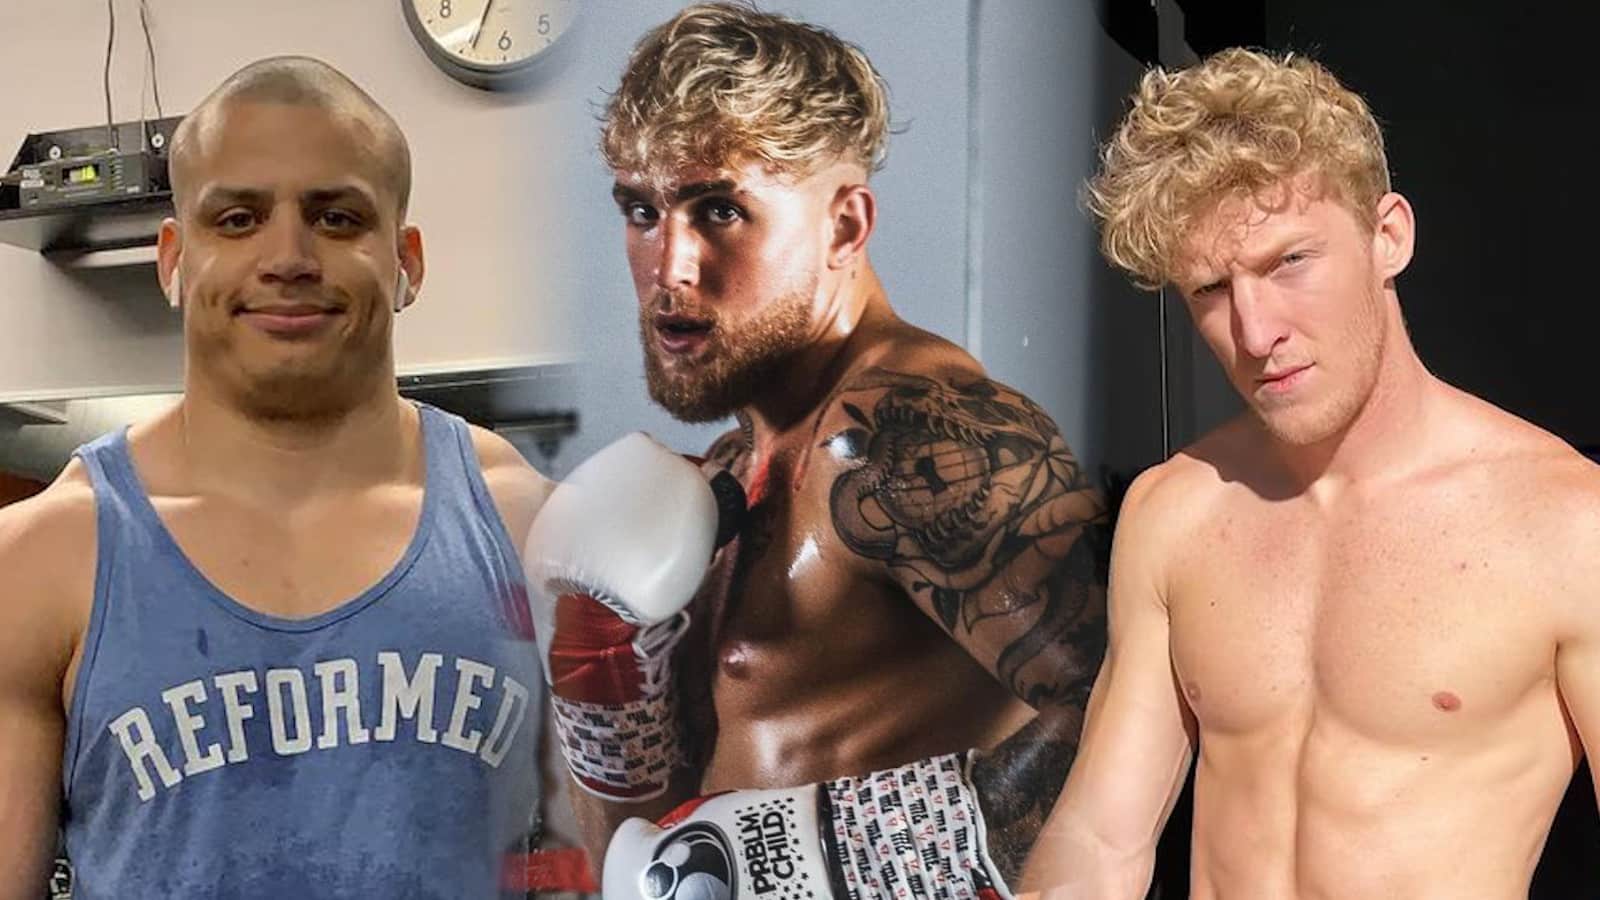 Jake Paul says he is down to “knock out” Twitch streamers if paid enough